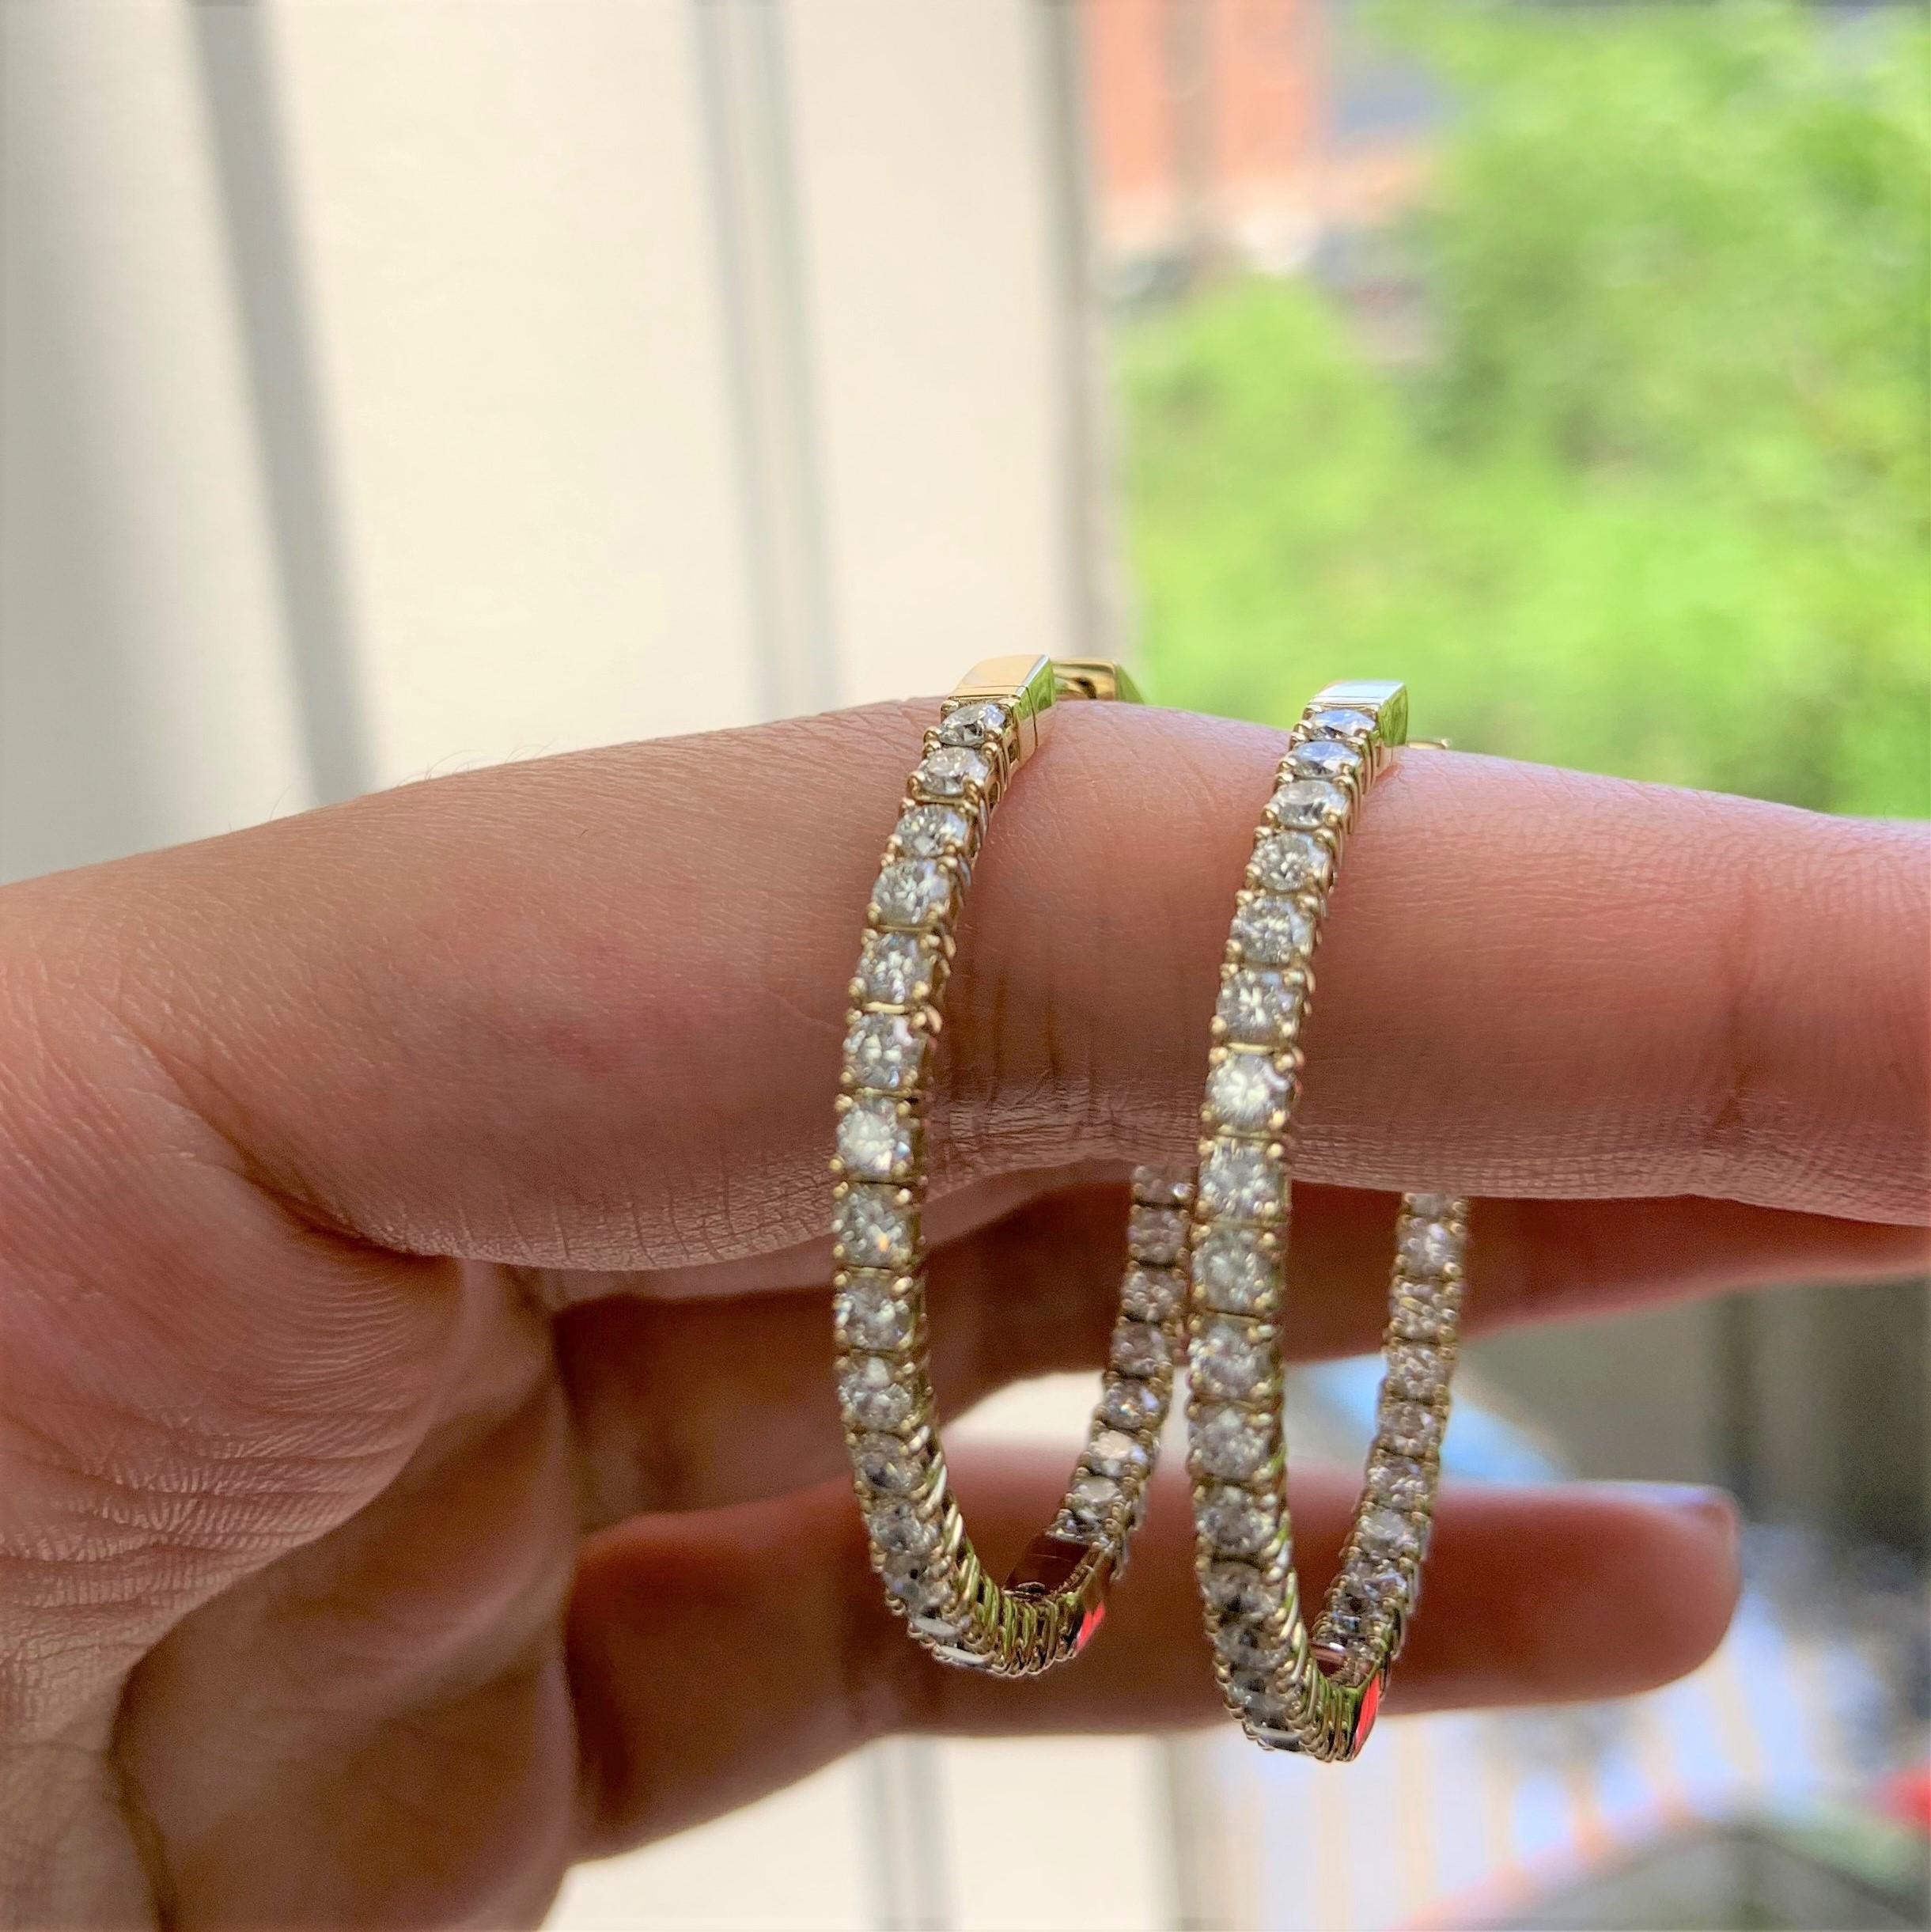 These Classic and Elegant Diamond Round Hoop Earrings will frame your face beautifully! Crafted of 14K Yellow Gold these earrings feature approximately 2.77cts of Natural Round Diamonds. Diamond Color and Clarity is GH-SI1. Insert Latch for